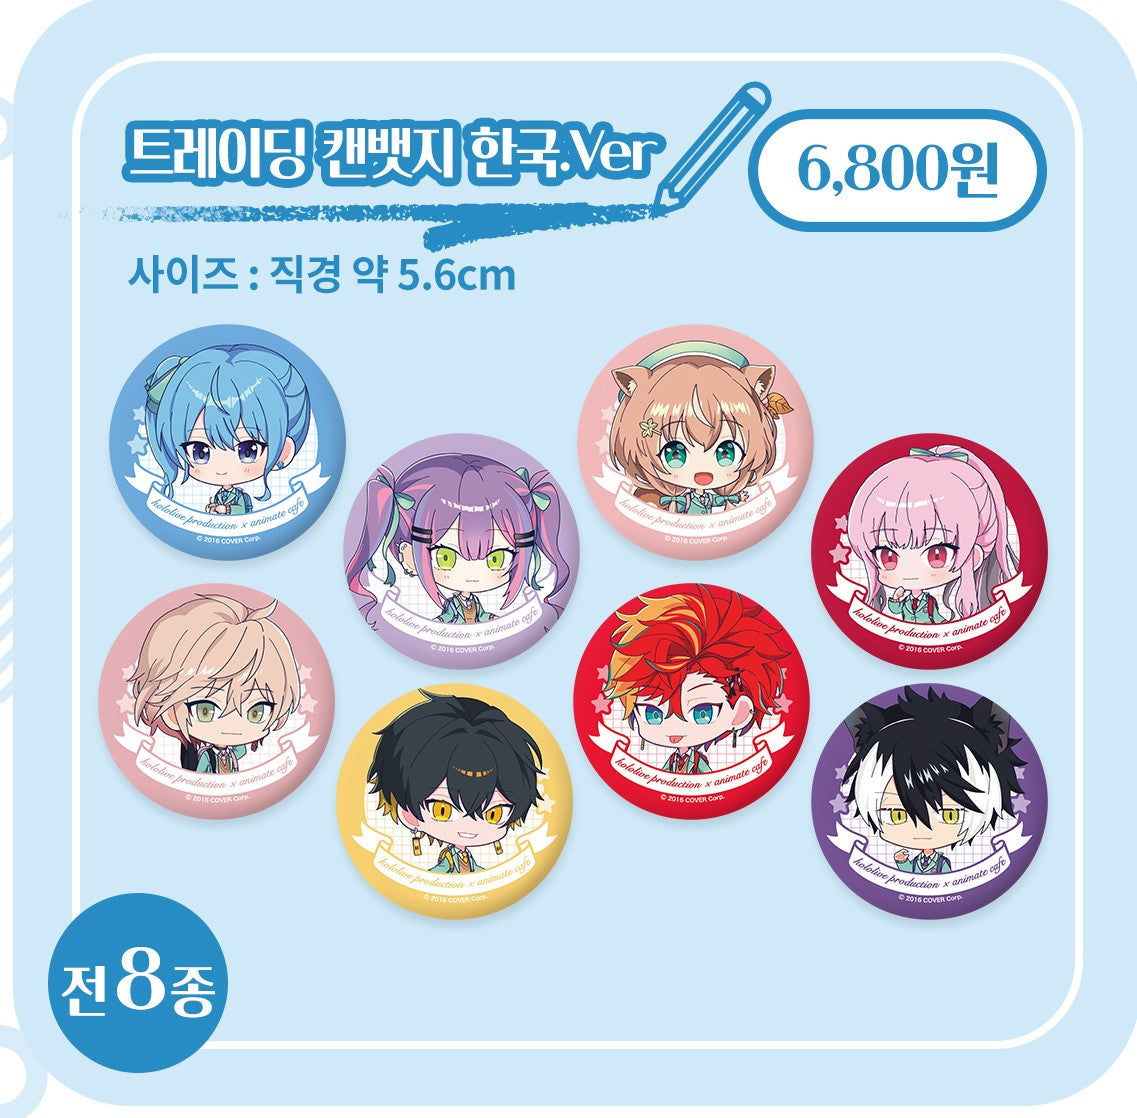 [In-stock]  Hololive production × Animate Cafe Goods